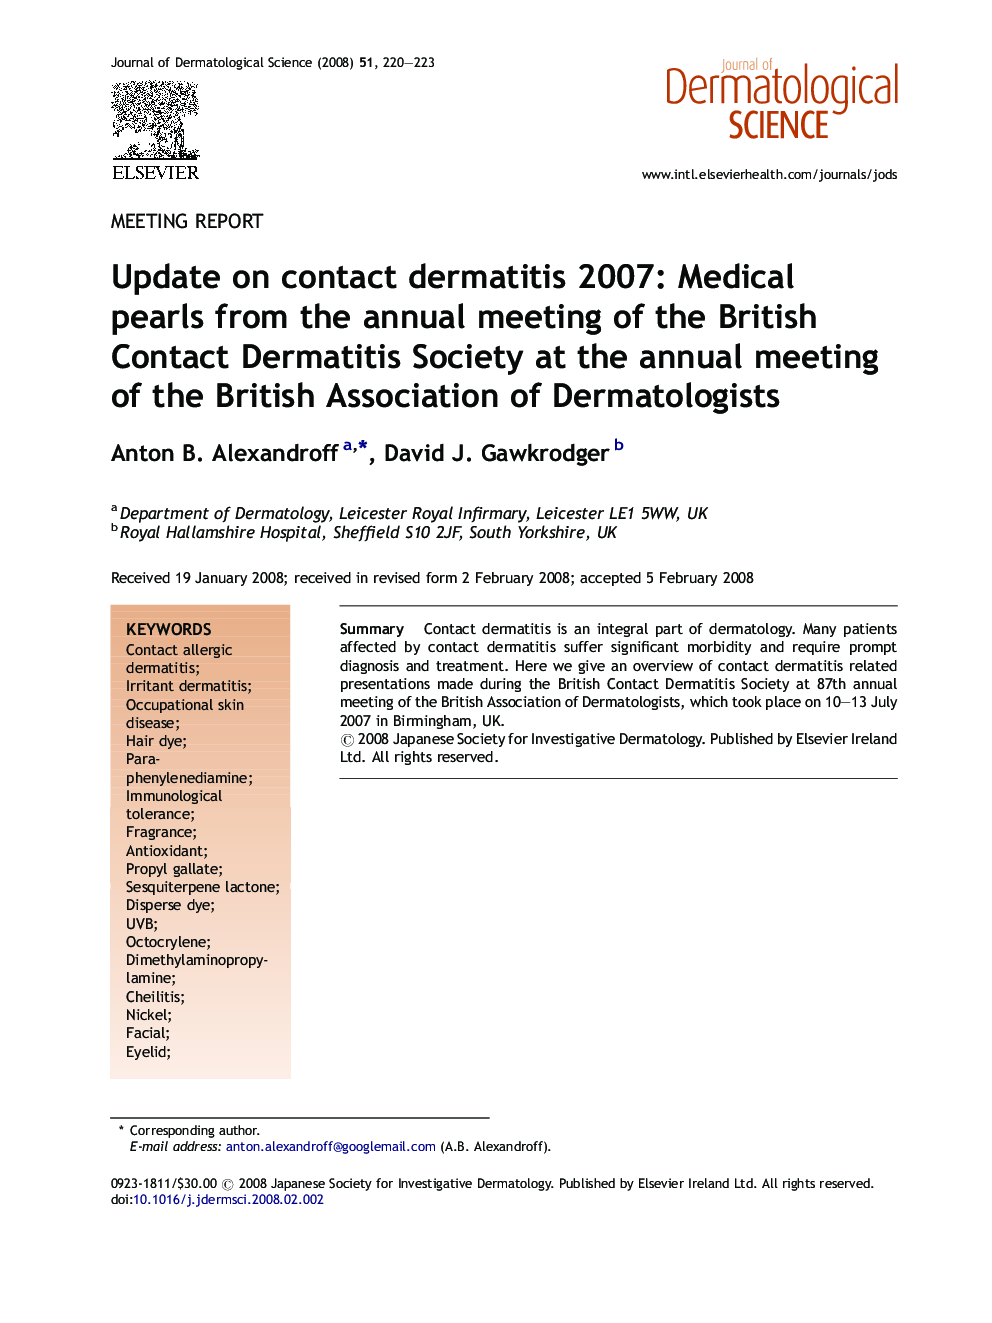 Update on contact dermatitis 2007: Medical pearls from the annual meeting of the British Contact Dermatitis Society at the annual meeting of the British Association of Dermatologists